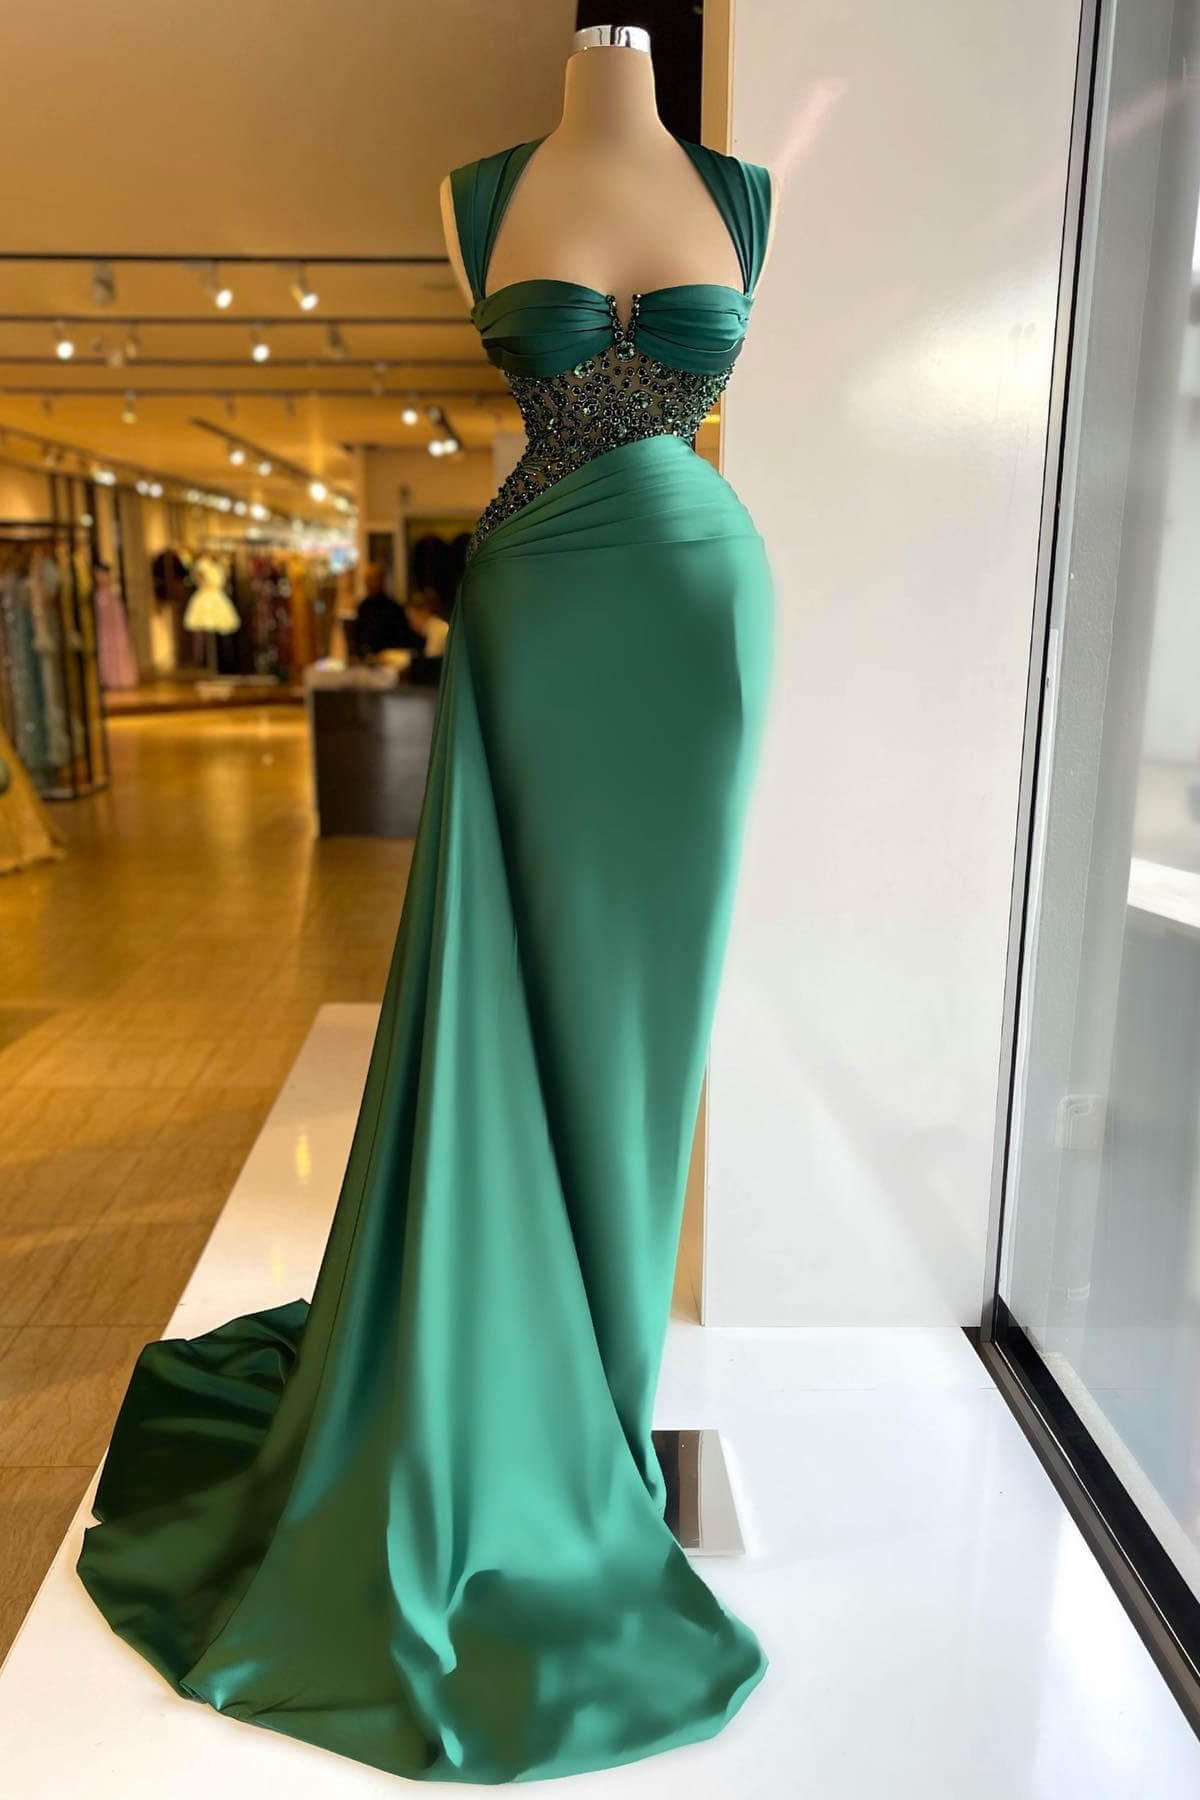 Chic Emerald Green Sleeveless Mermaid Evening Gown With Ruffles Beads Crystals - lulusllly